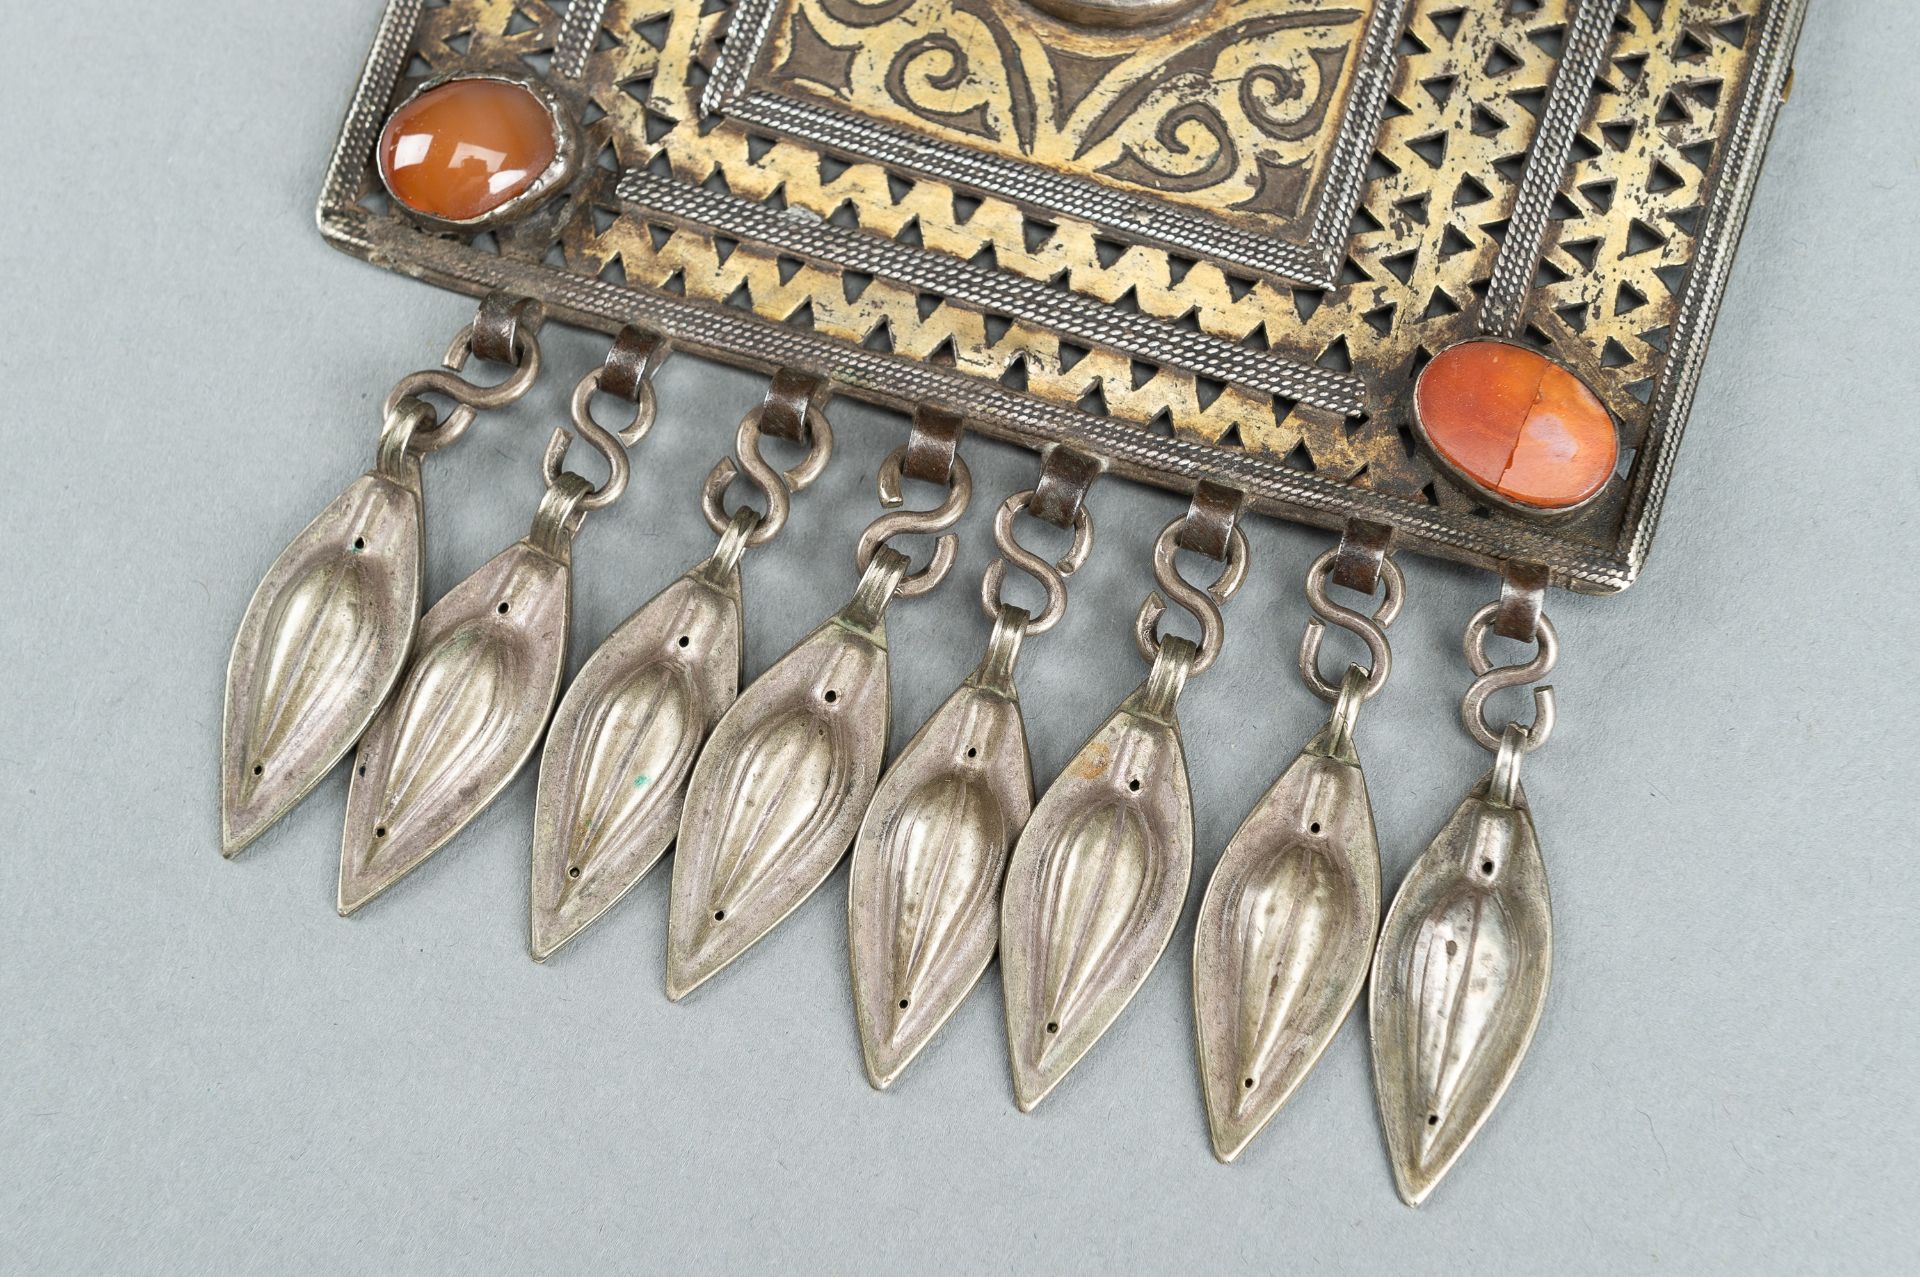 A TURKOMAN METAL AND CARNELIAN CHEST ORNAMENT, c. 1900s - Image 8 of 10